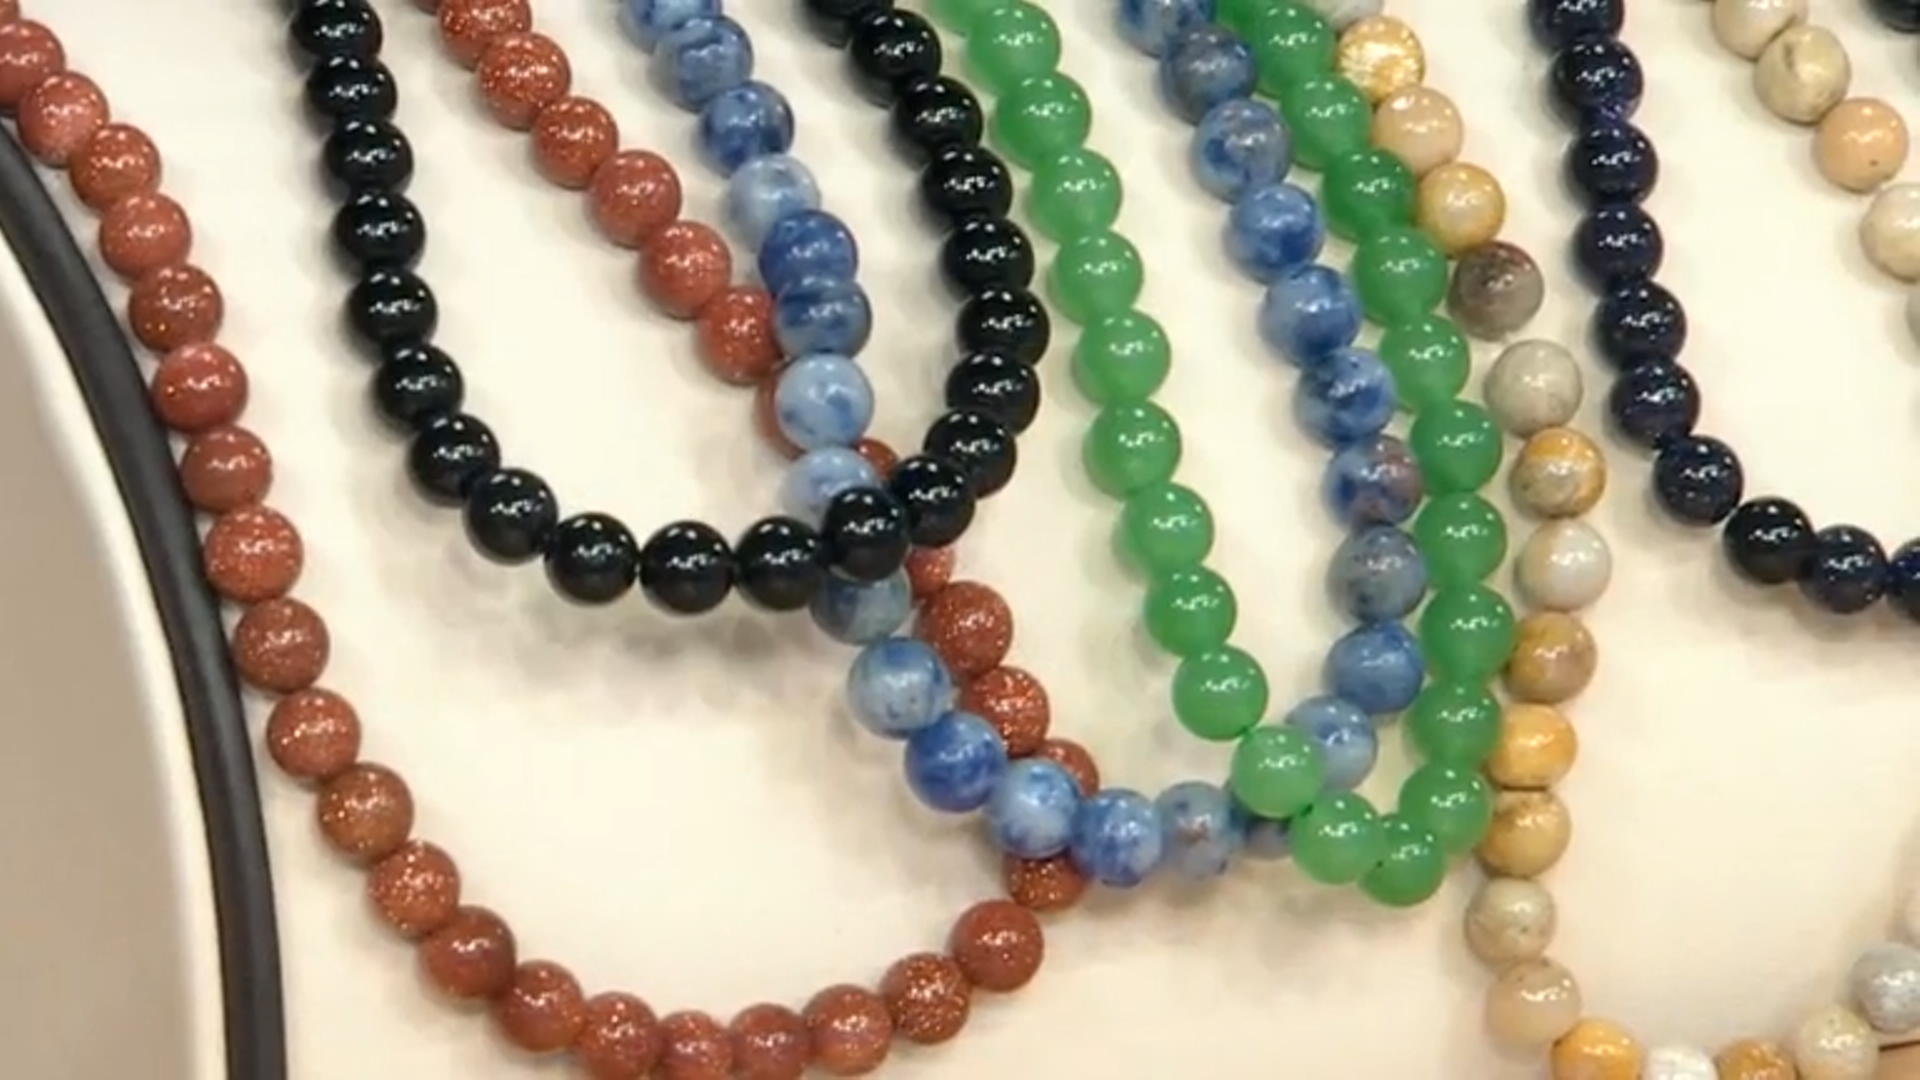 Multi-Stone Round appx 5-7mm Bead Strand Set of 16 appx 15-16" Video Thumbnail